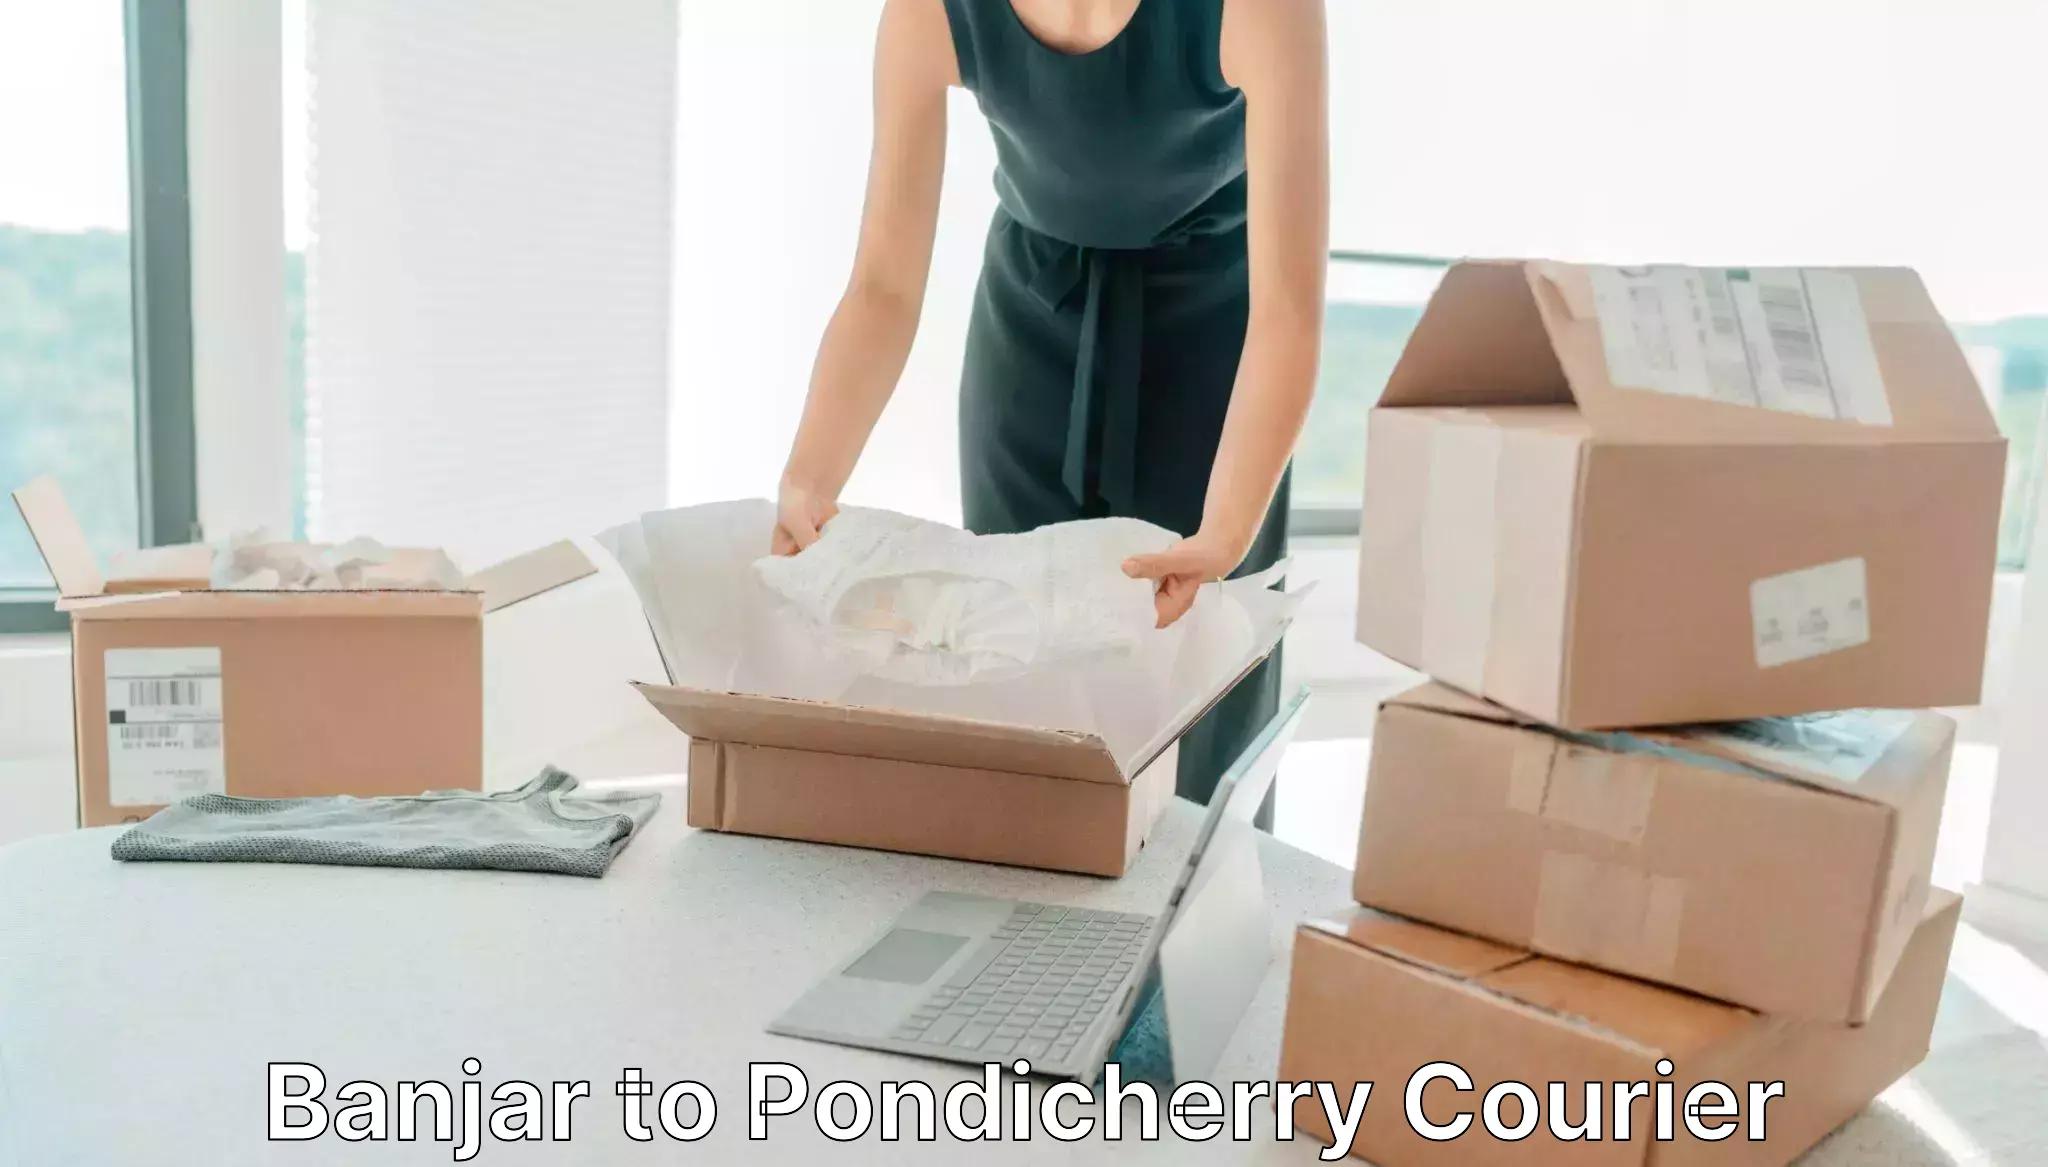 Subscription-based courier Banjar to Pondicherry